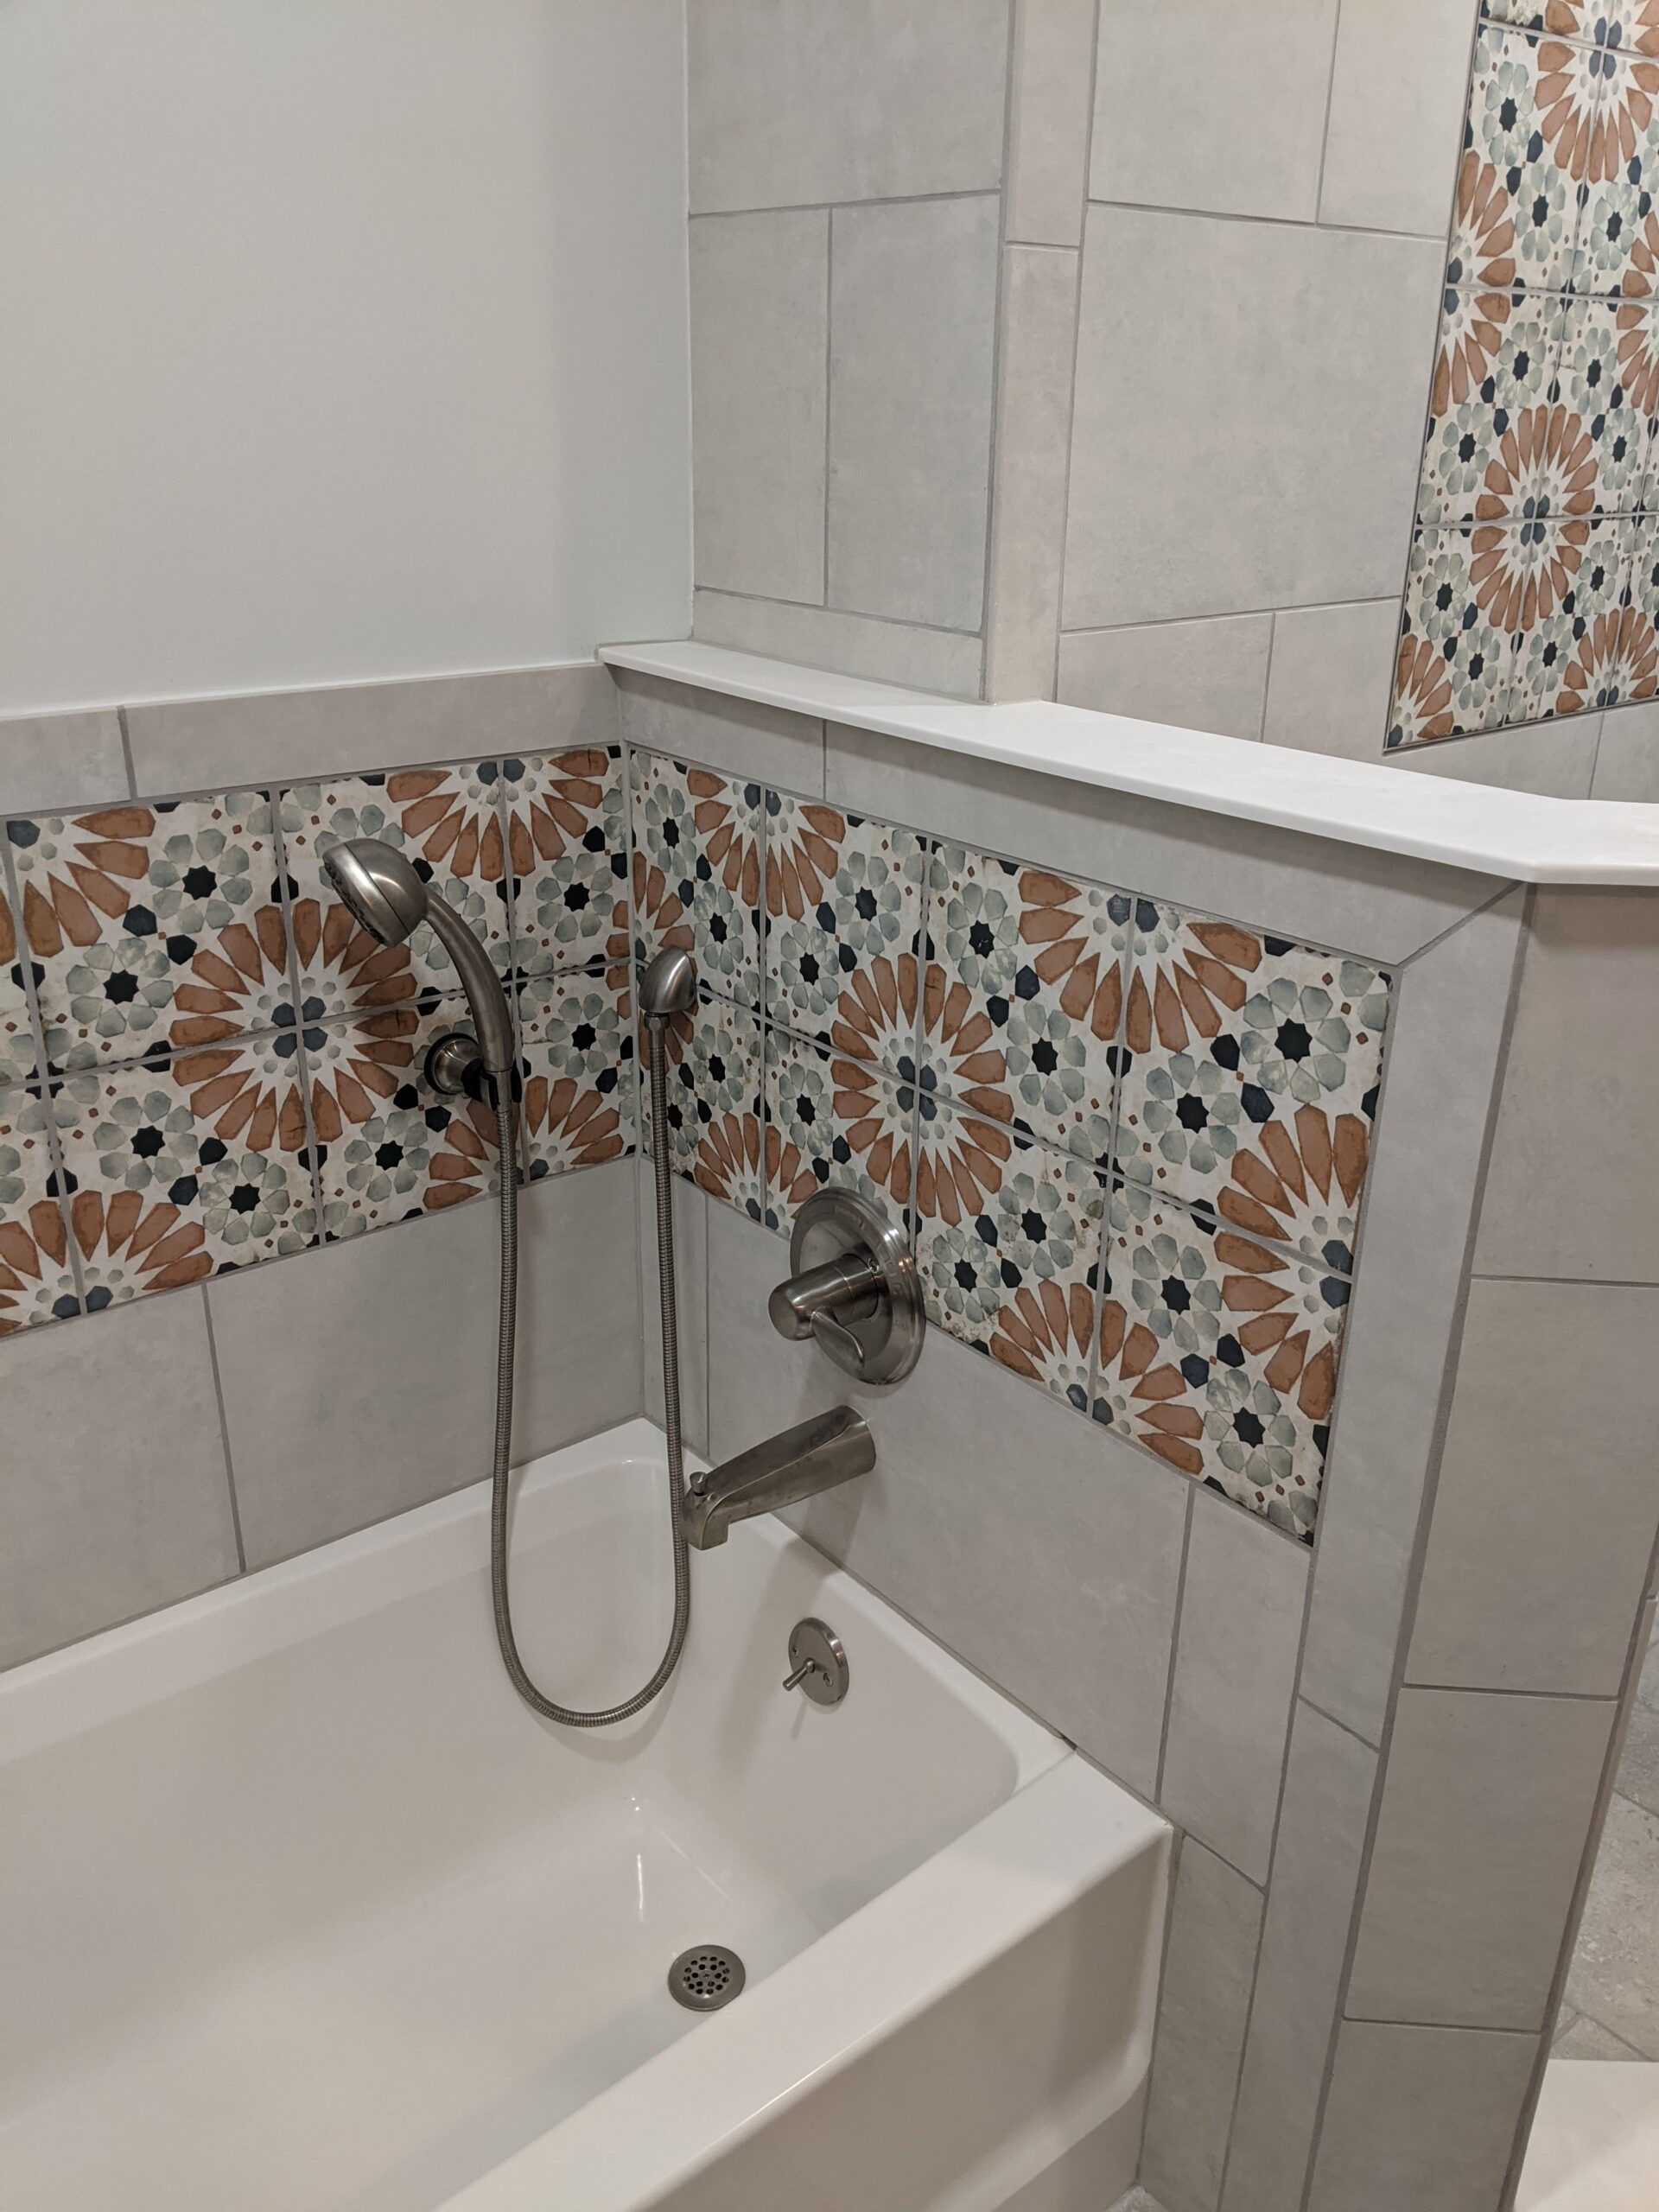 The tub area is now a standard tub with tile and decorative tile surrounding it with a hand held and new fixtures.